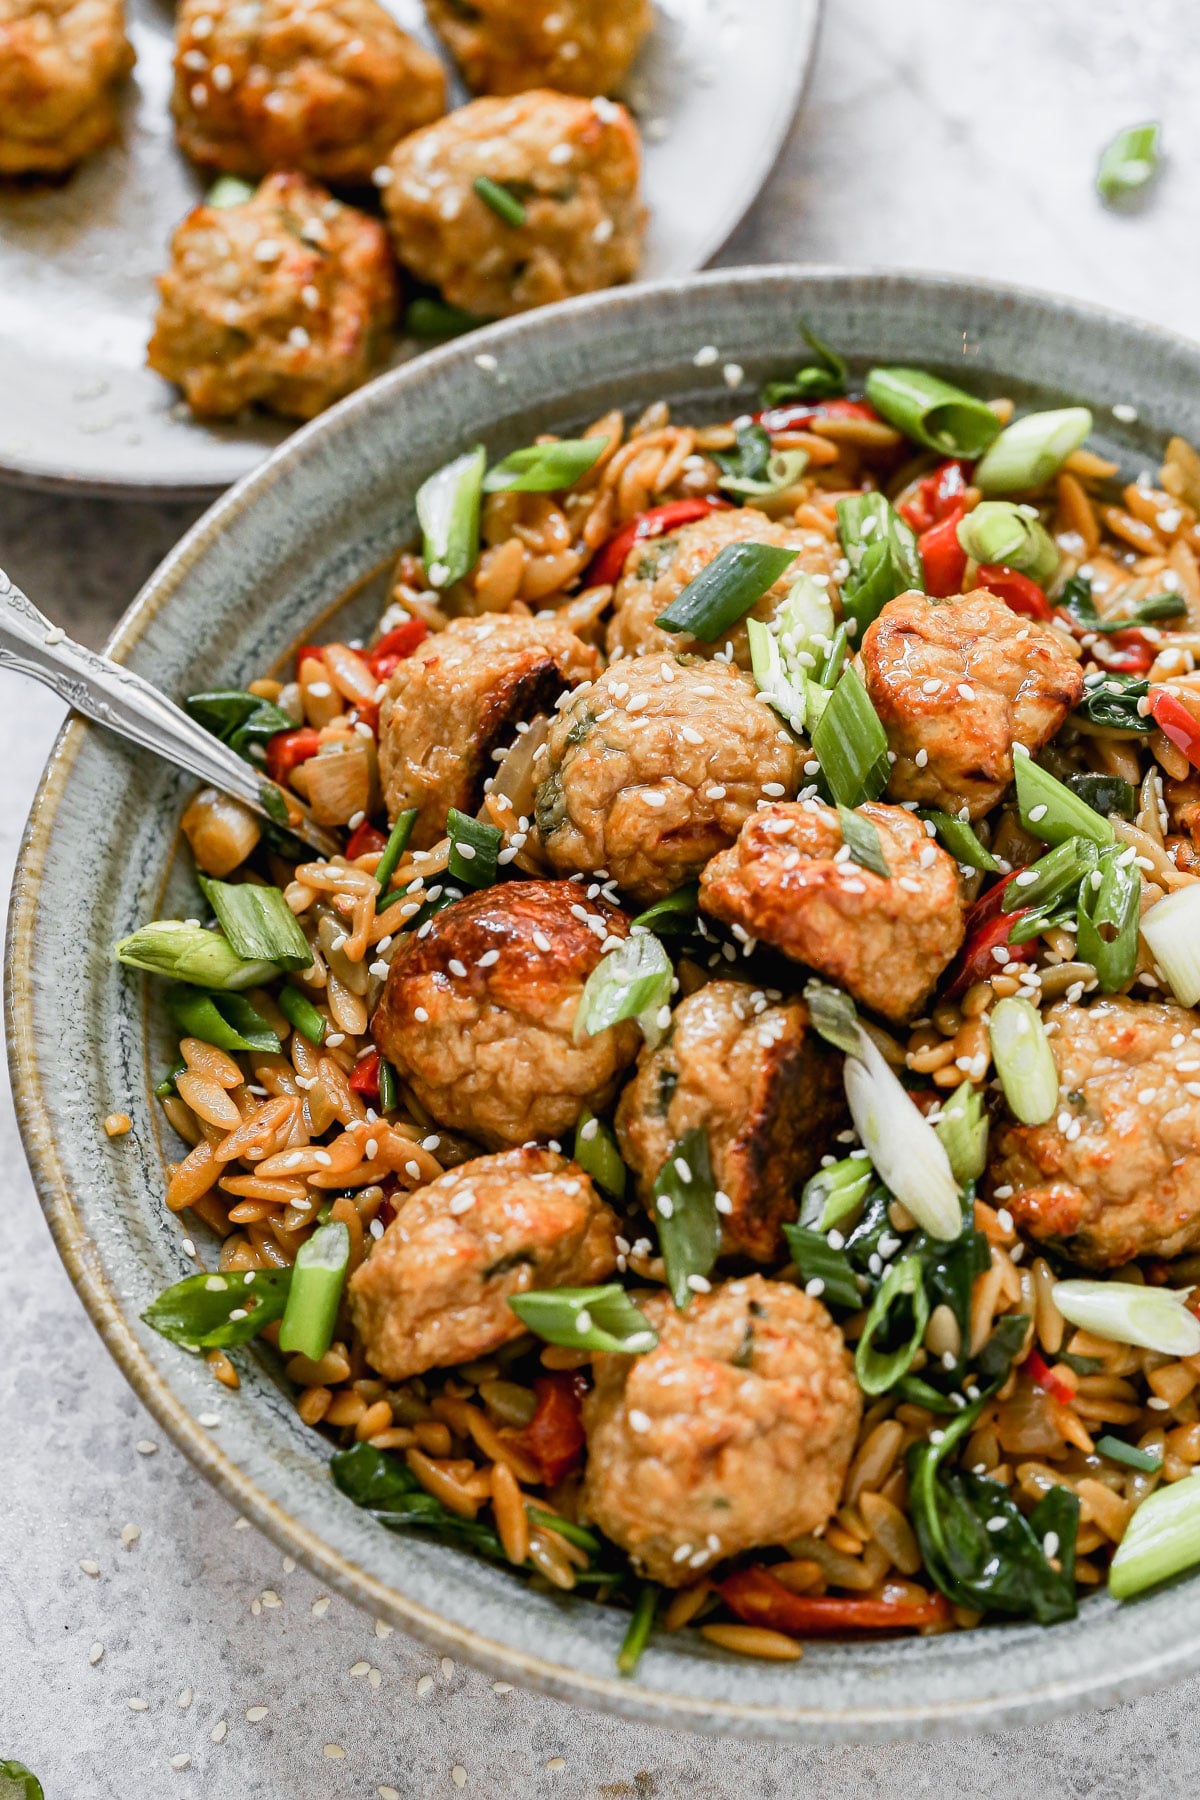 Our current favorite was to do meatballs: Asian Chicken Meatballs with Saucy Sesame and Hoisin Orzo. This fun spin on a classic pairs tender, garlic and ginger BAKED meatballs with an orzo full of veggies and an addictive sauce you'll want to lick with the a spoon. Prep ahead and eat later in the week!&nbsp;